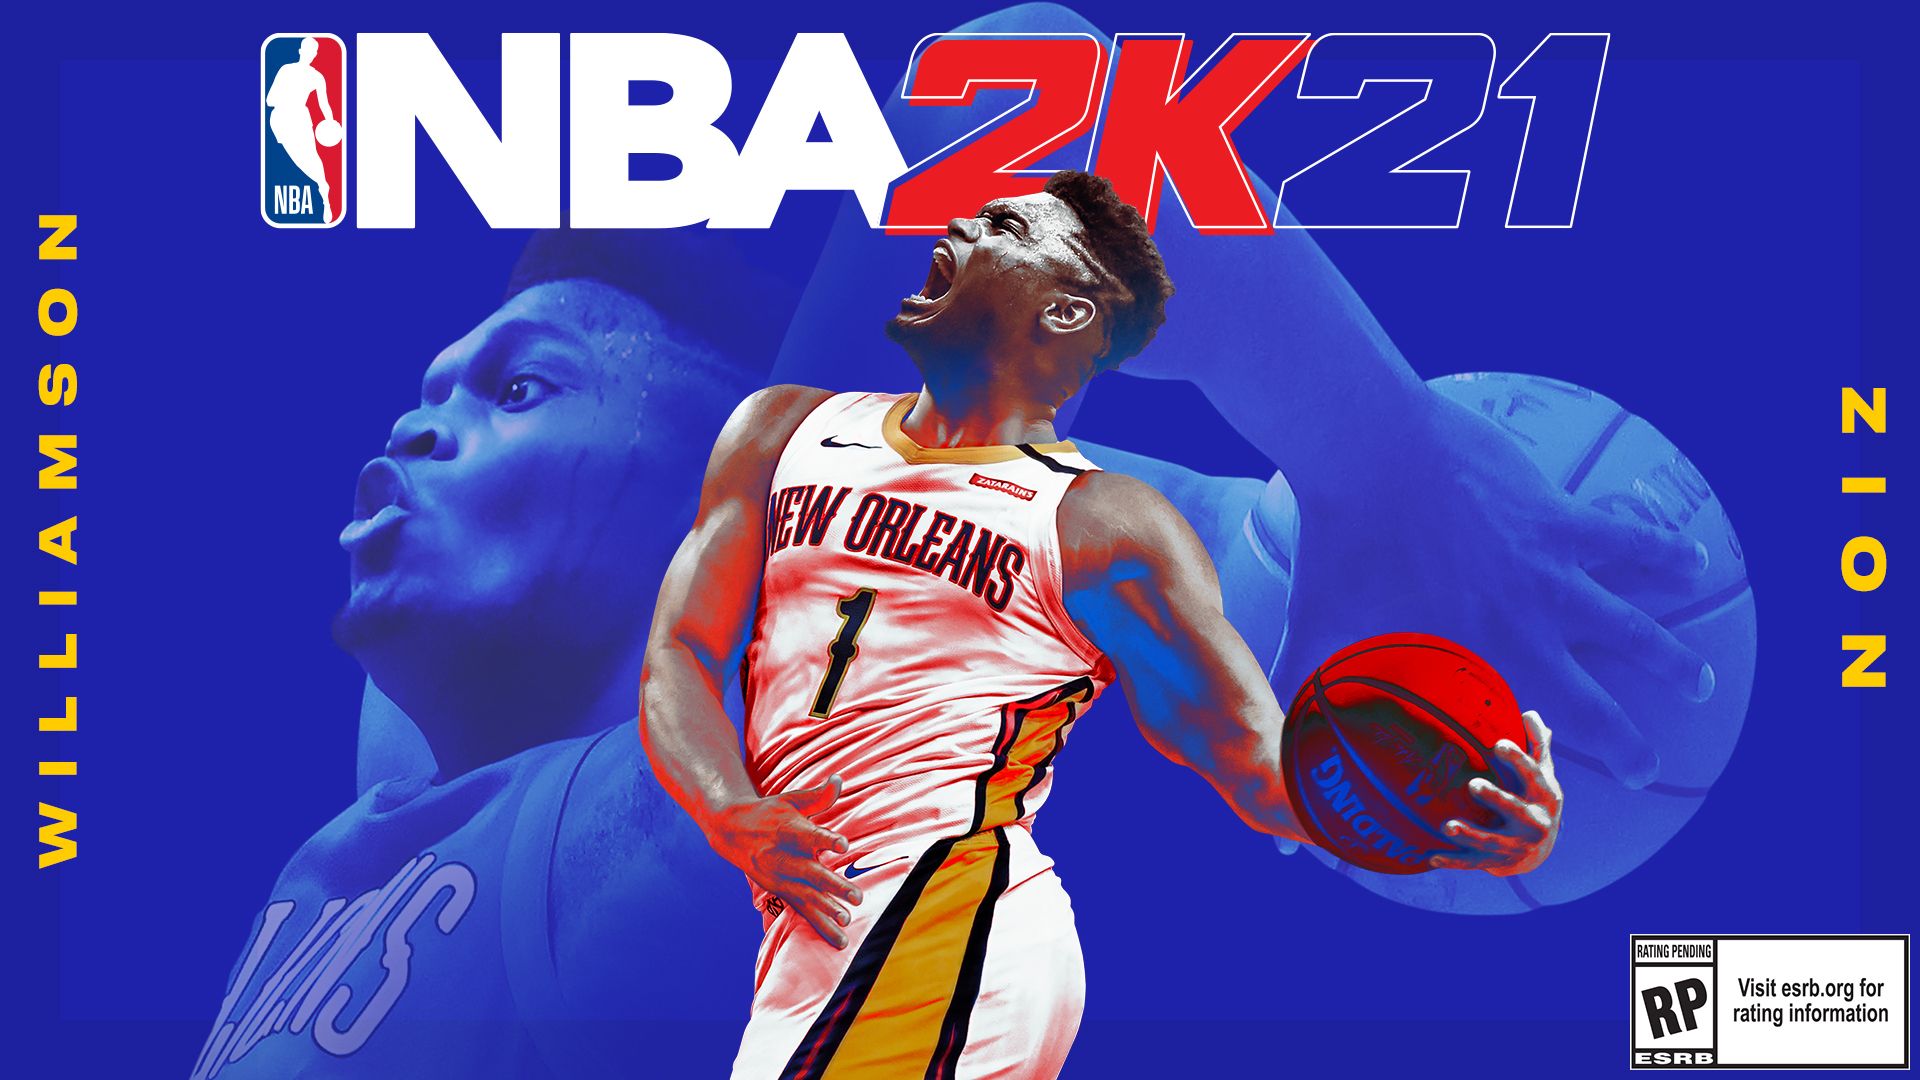 Zion Williamson on cover of NBA 2K21 for Next